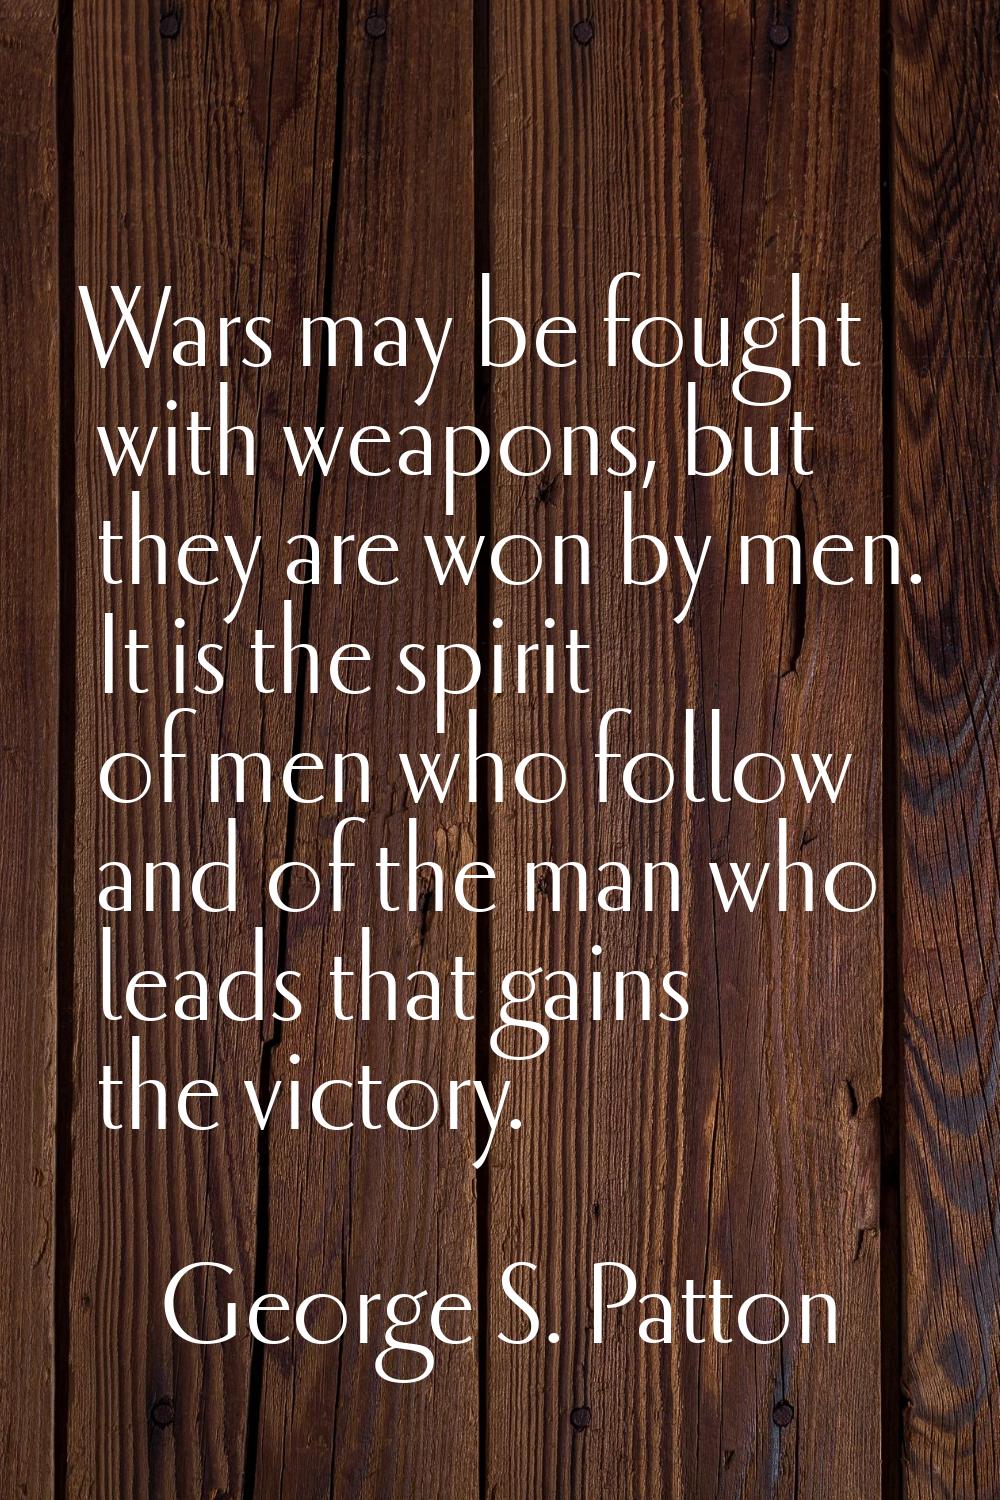 Wars may be fought with weapons, but they are won by men. It is the spirit of men who follow and of